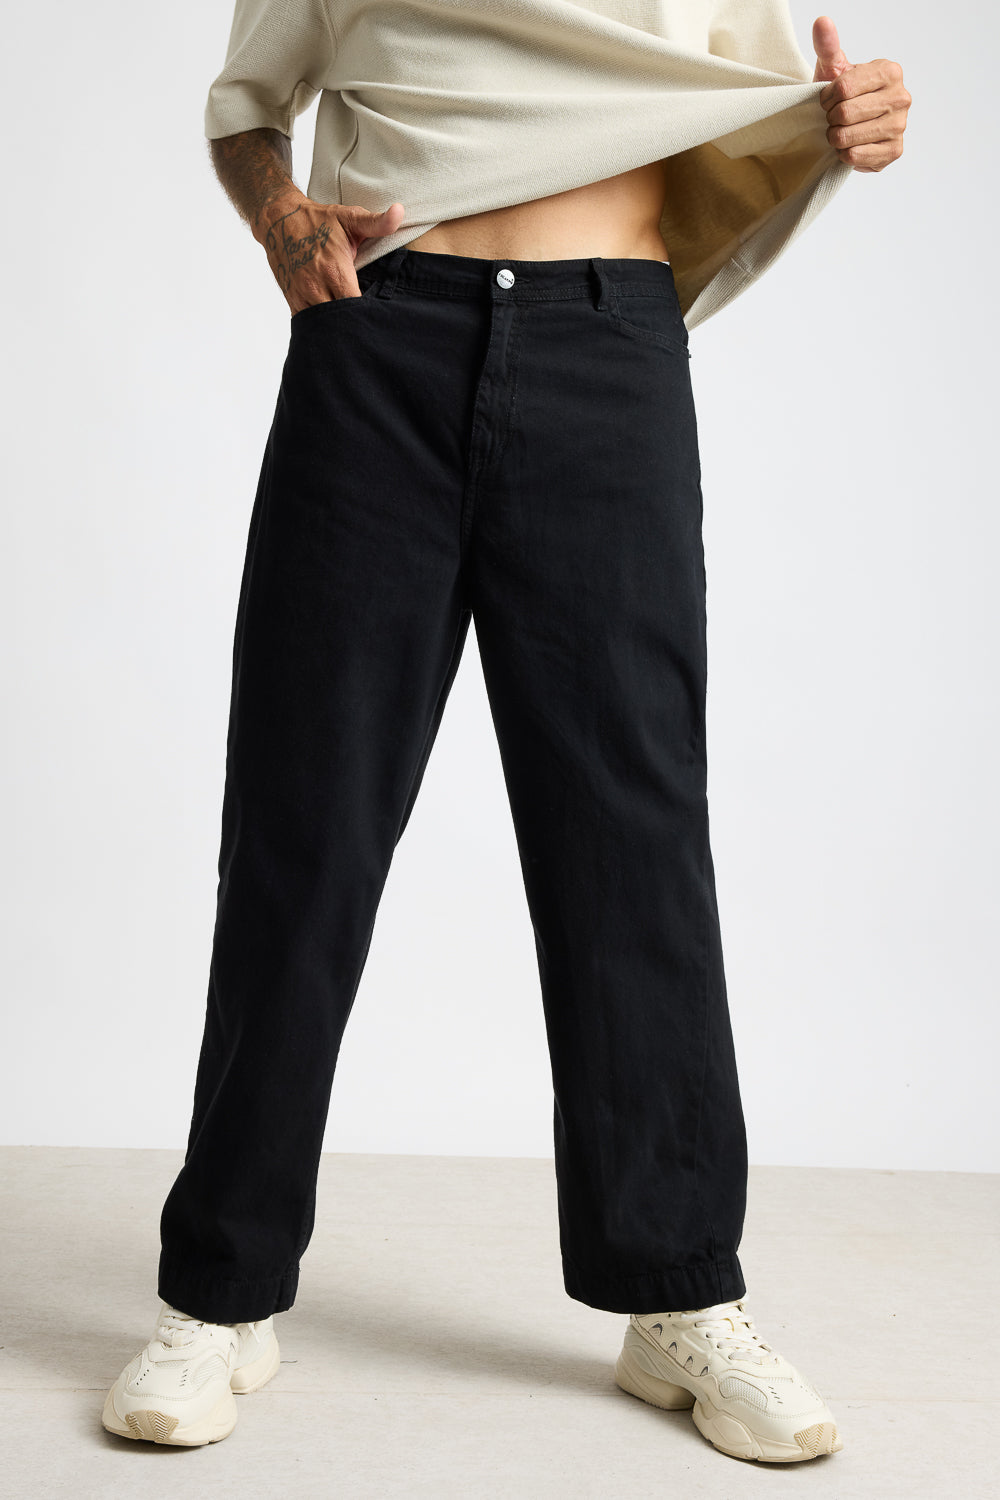 STRAIGHT CASUAL BLACK MENS JEANS